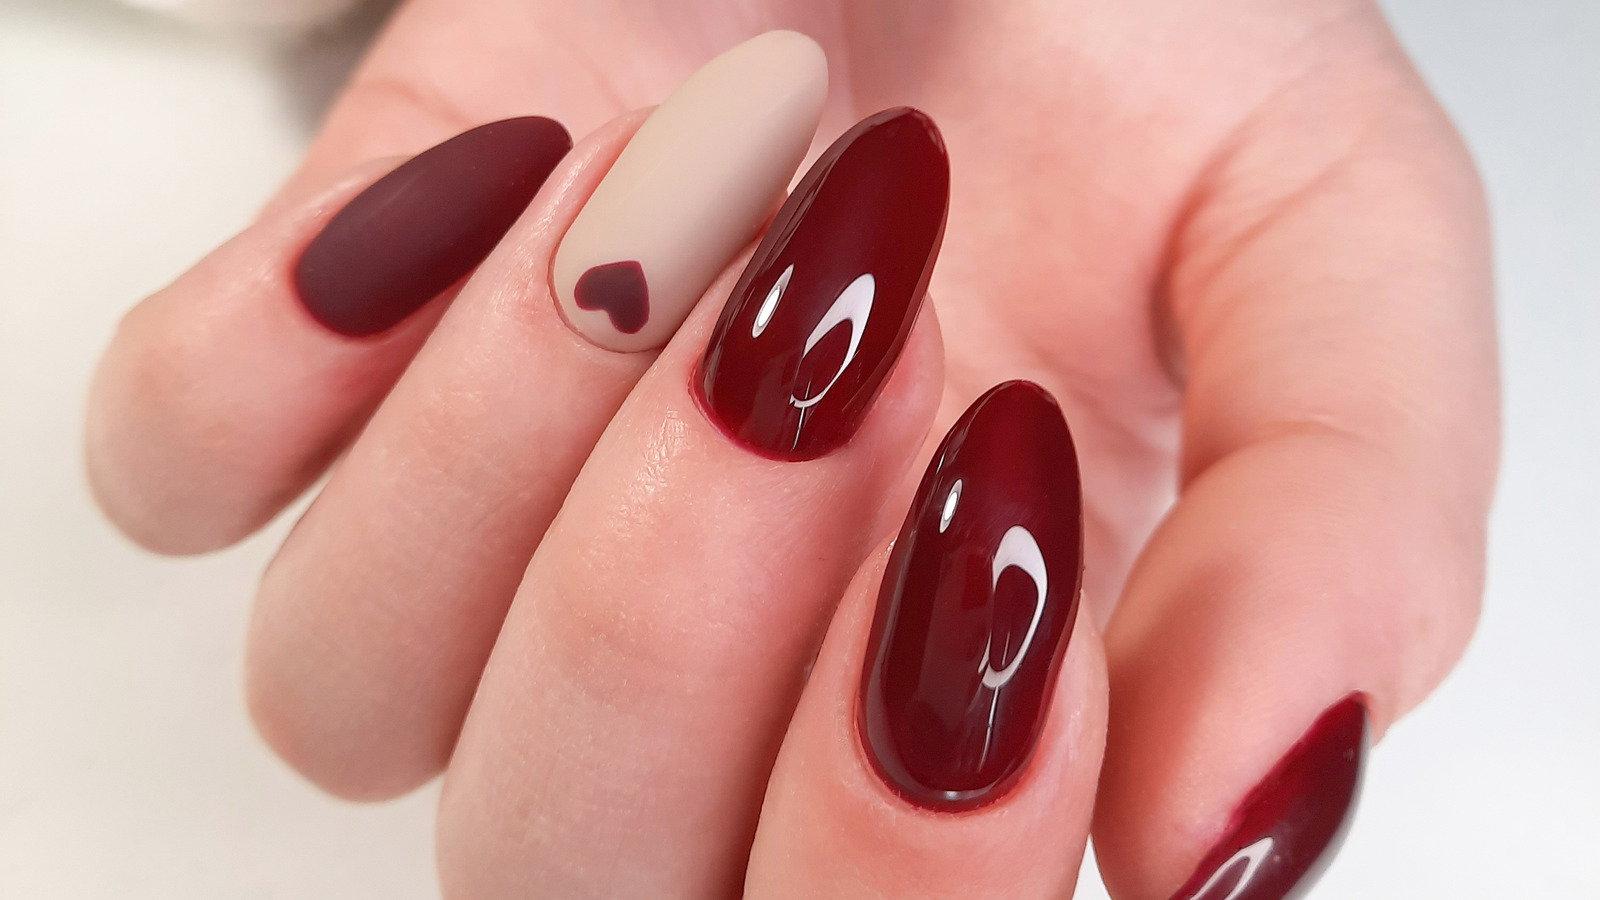 6. "Bold and Beautiful Valentine's Day Nail Colors" - wide 7